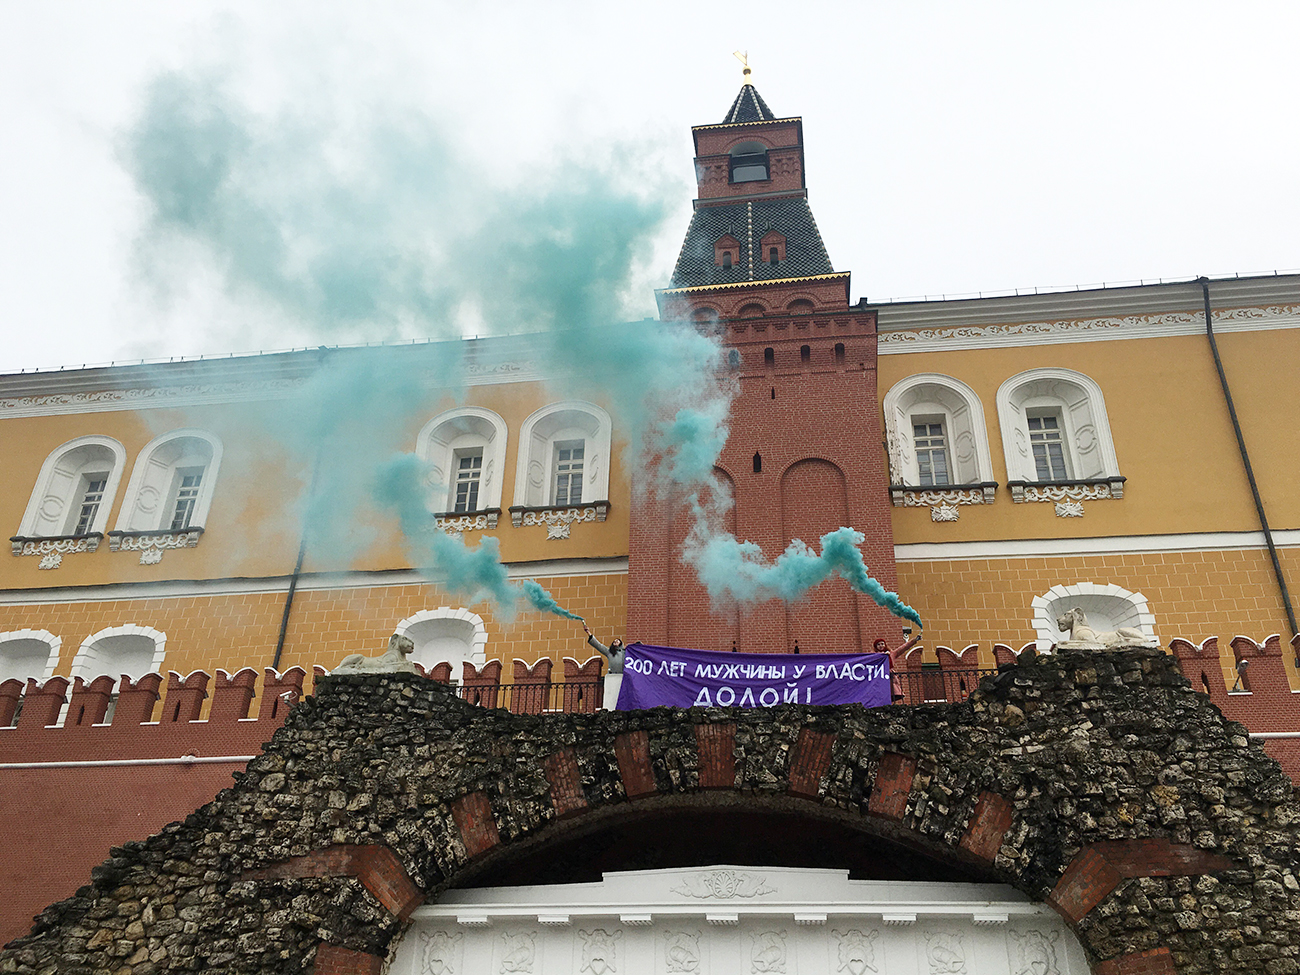 MOSCOW, RUSSIA - MARCH 8, 2017: Feminist activists unfurl a banner with a message reading "Men have been in power for 200 years. Down with it!" and light smoke flares outside the Kremlin on the International Women's Day